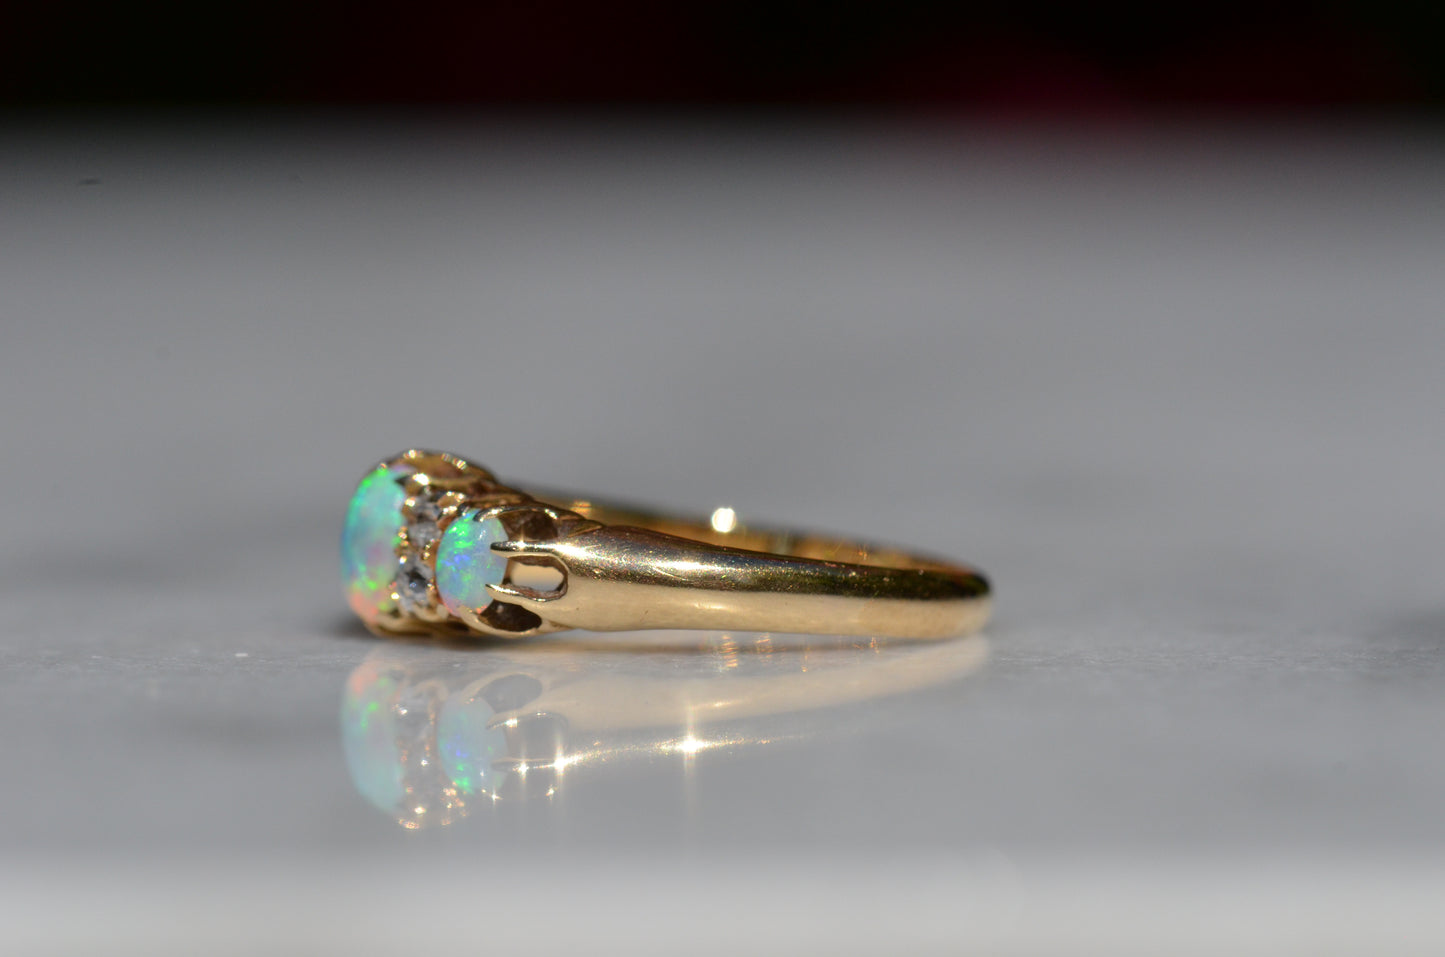 A closely-cropped macro of the Victorian ring, showcasing the strong green and blue play of color in the opals with a hint of violet and orange. The ring is photographed turned to the left to better showcase the slim prongs and buttery gold band.